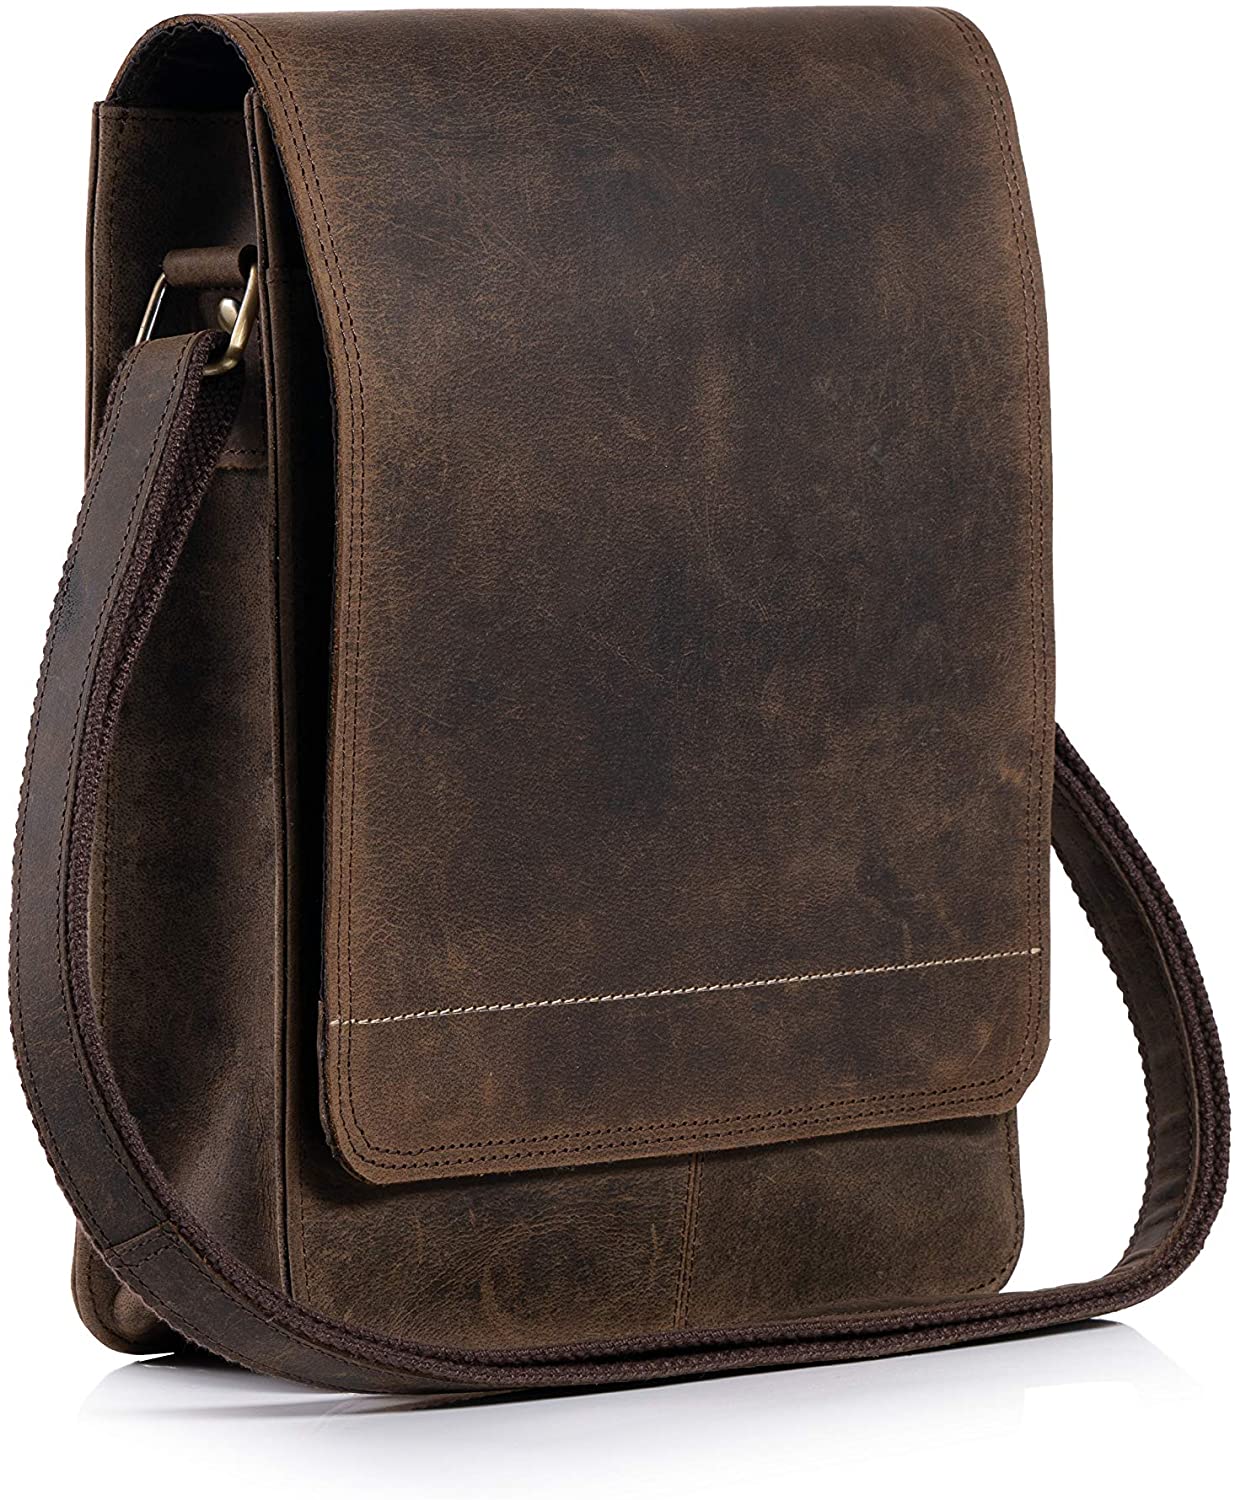 Komal's Passion Leather 11 Inch Sturdy Leather satchel iPad Messenger